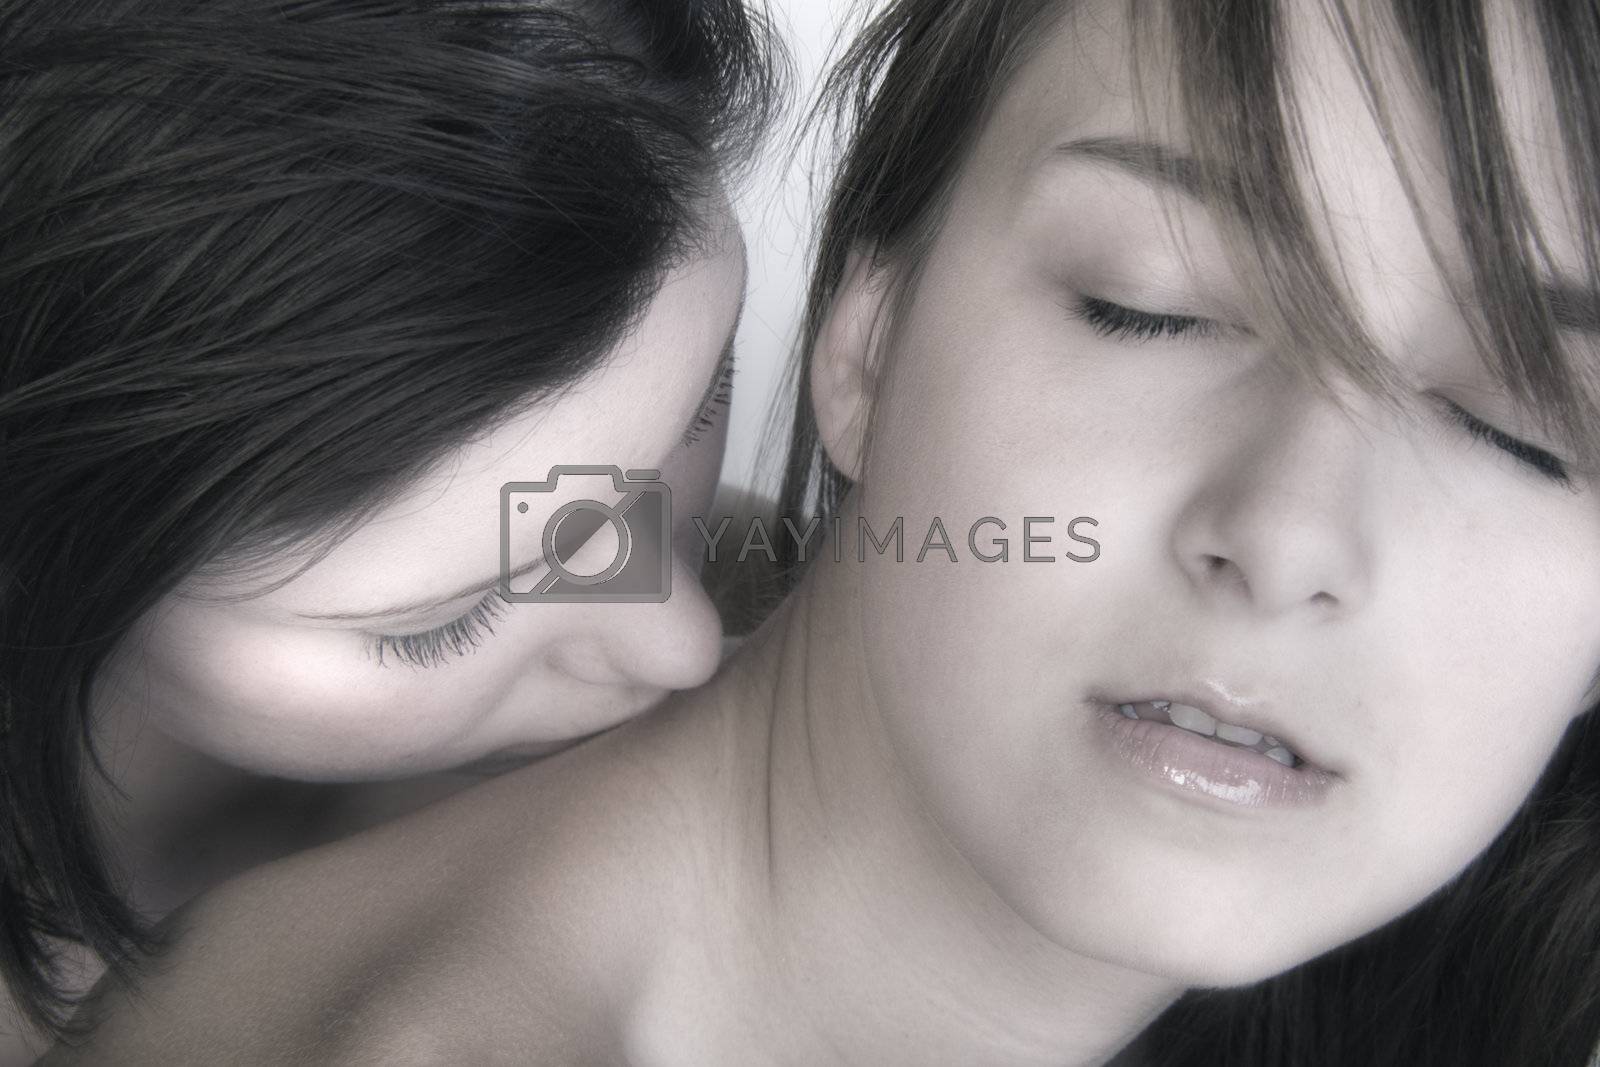 Royalty free image of females kissing by DNFStyle